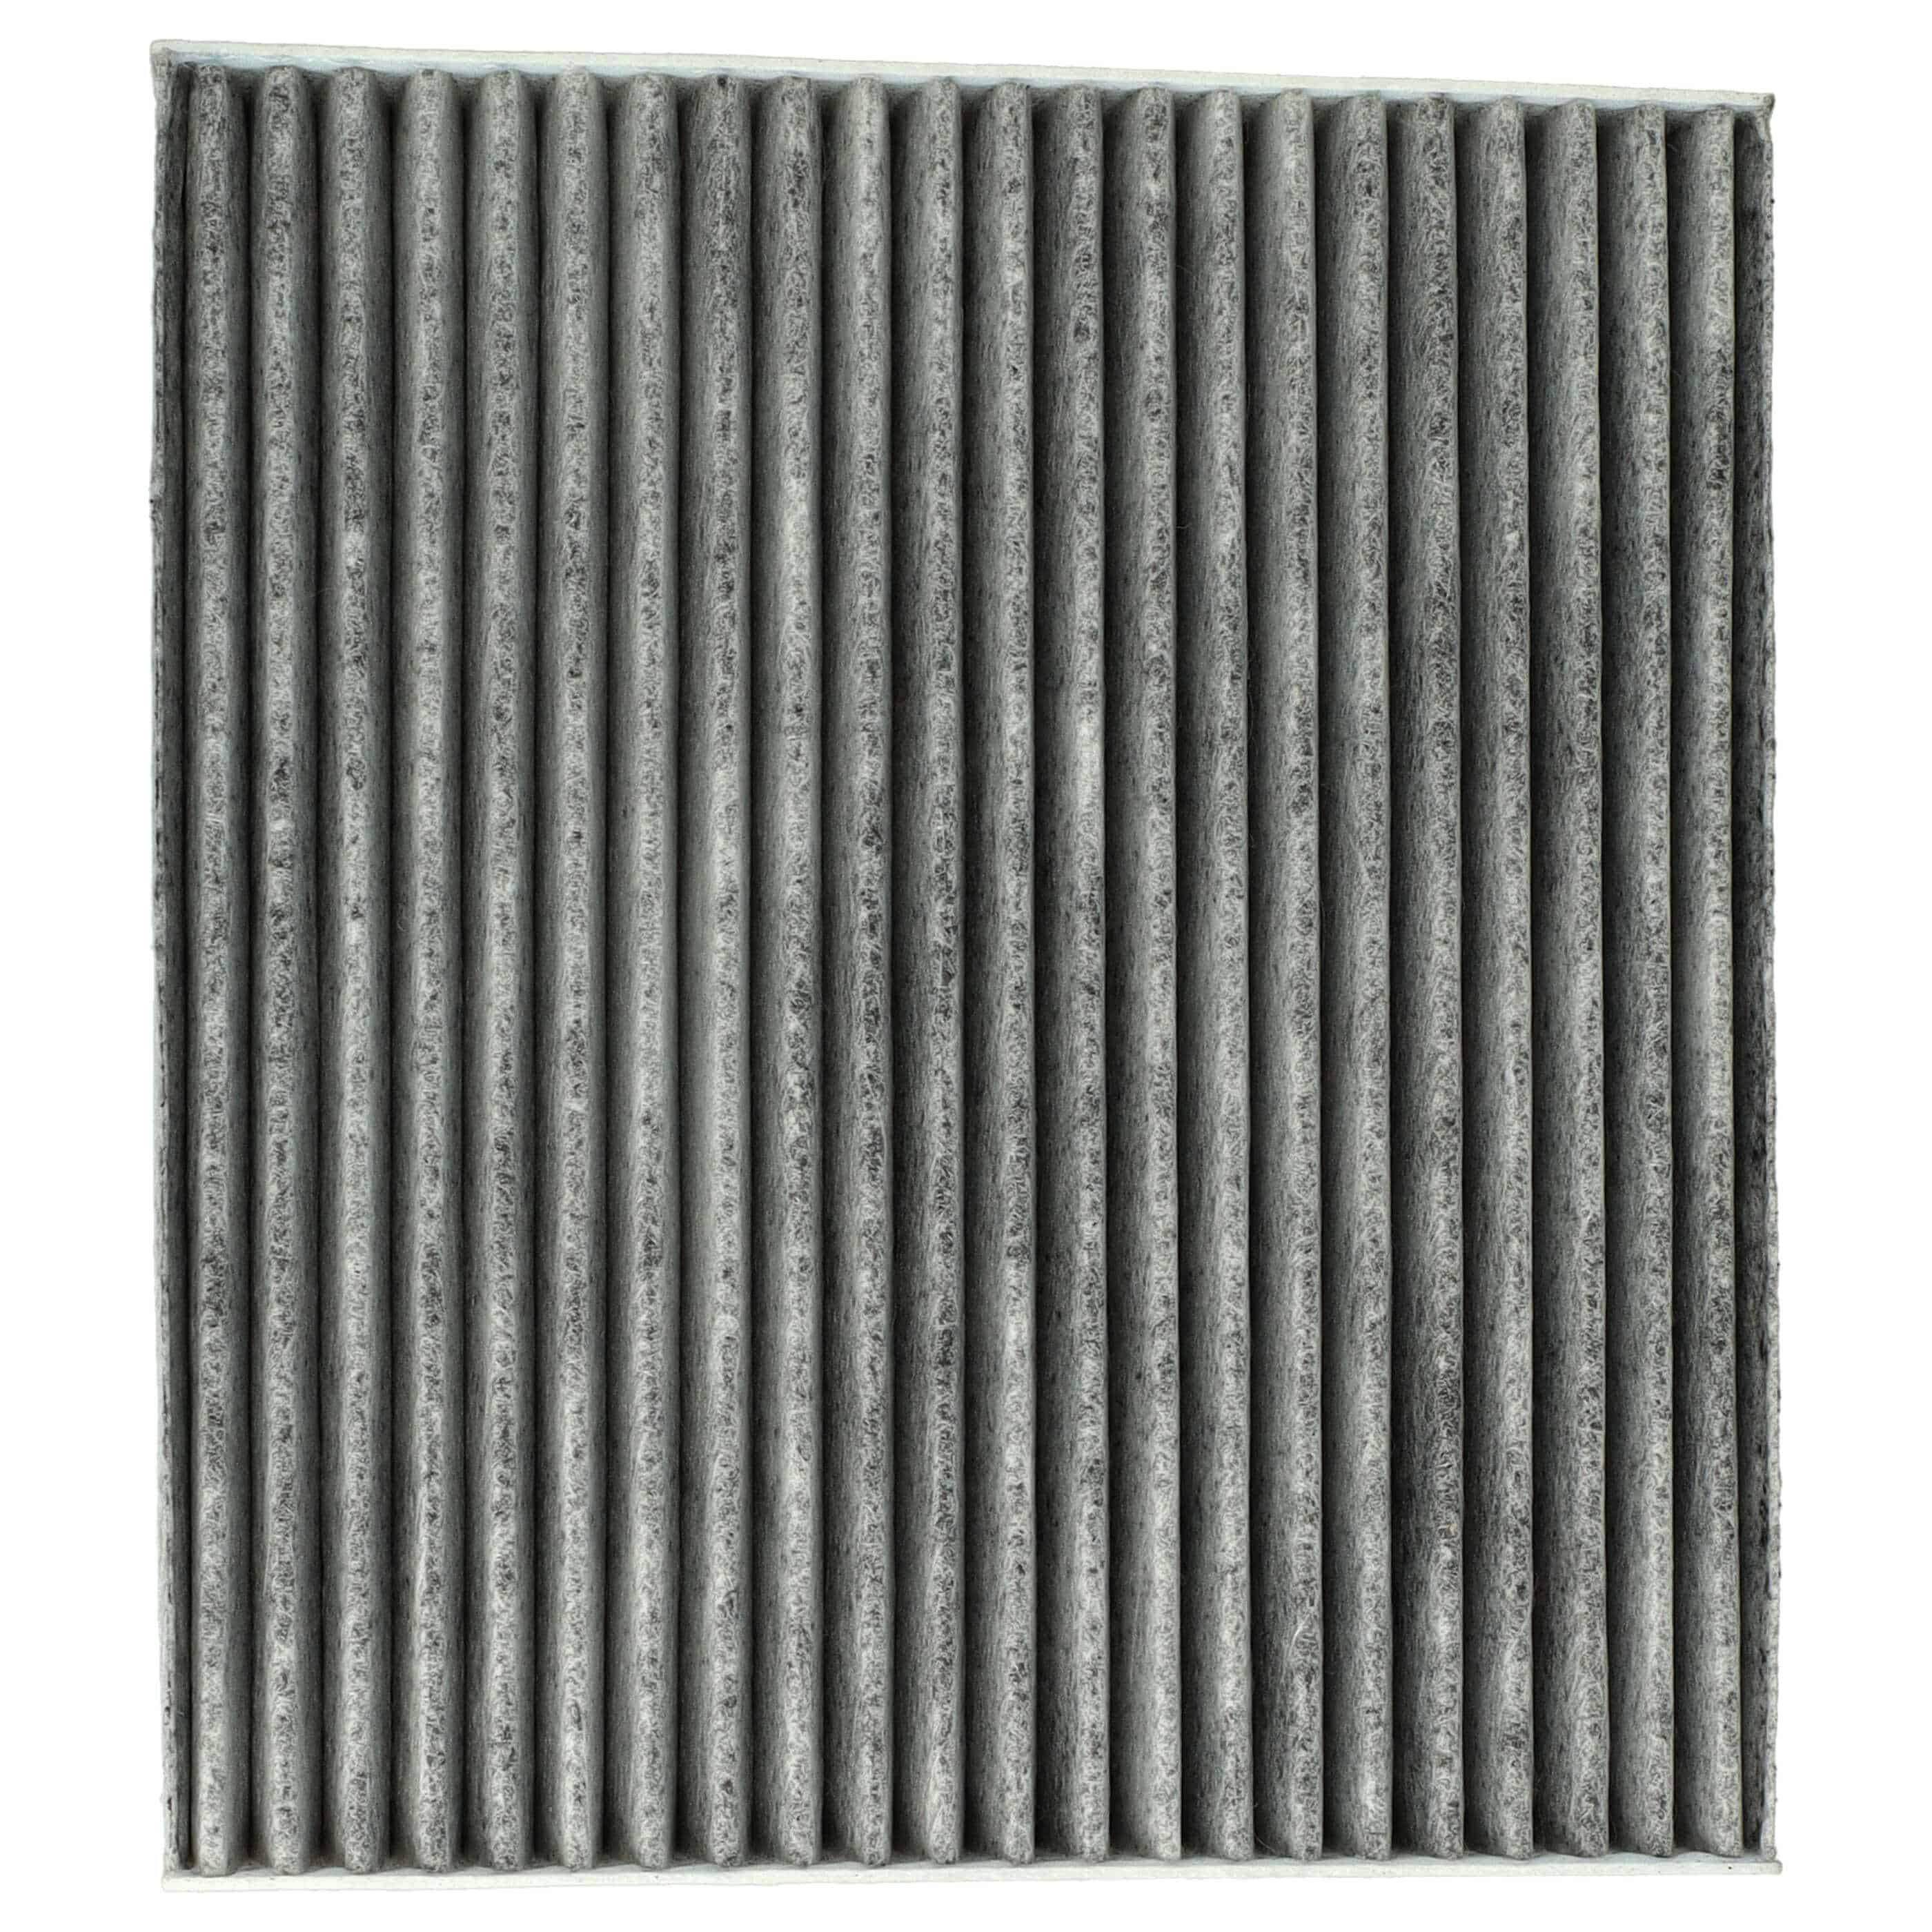 Cabin Air Filter replaces 1A First Automotive C30257, C30261 etc.